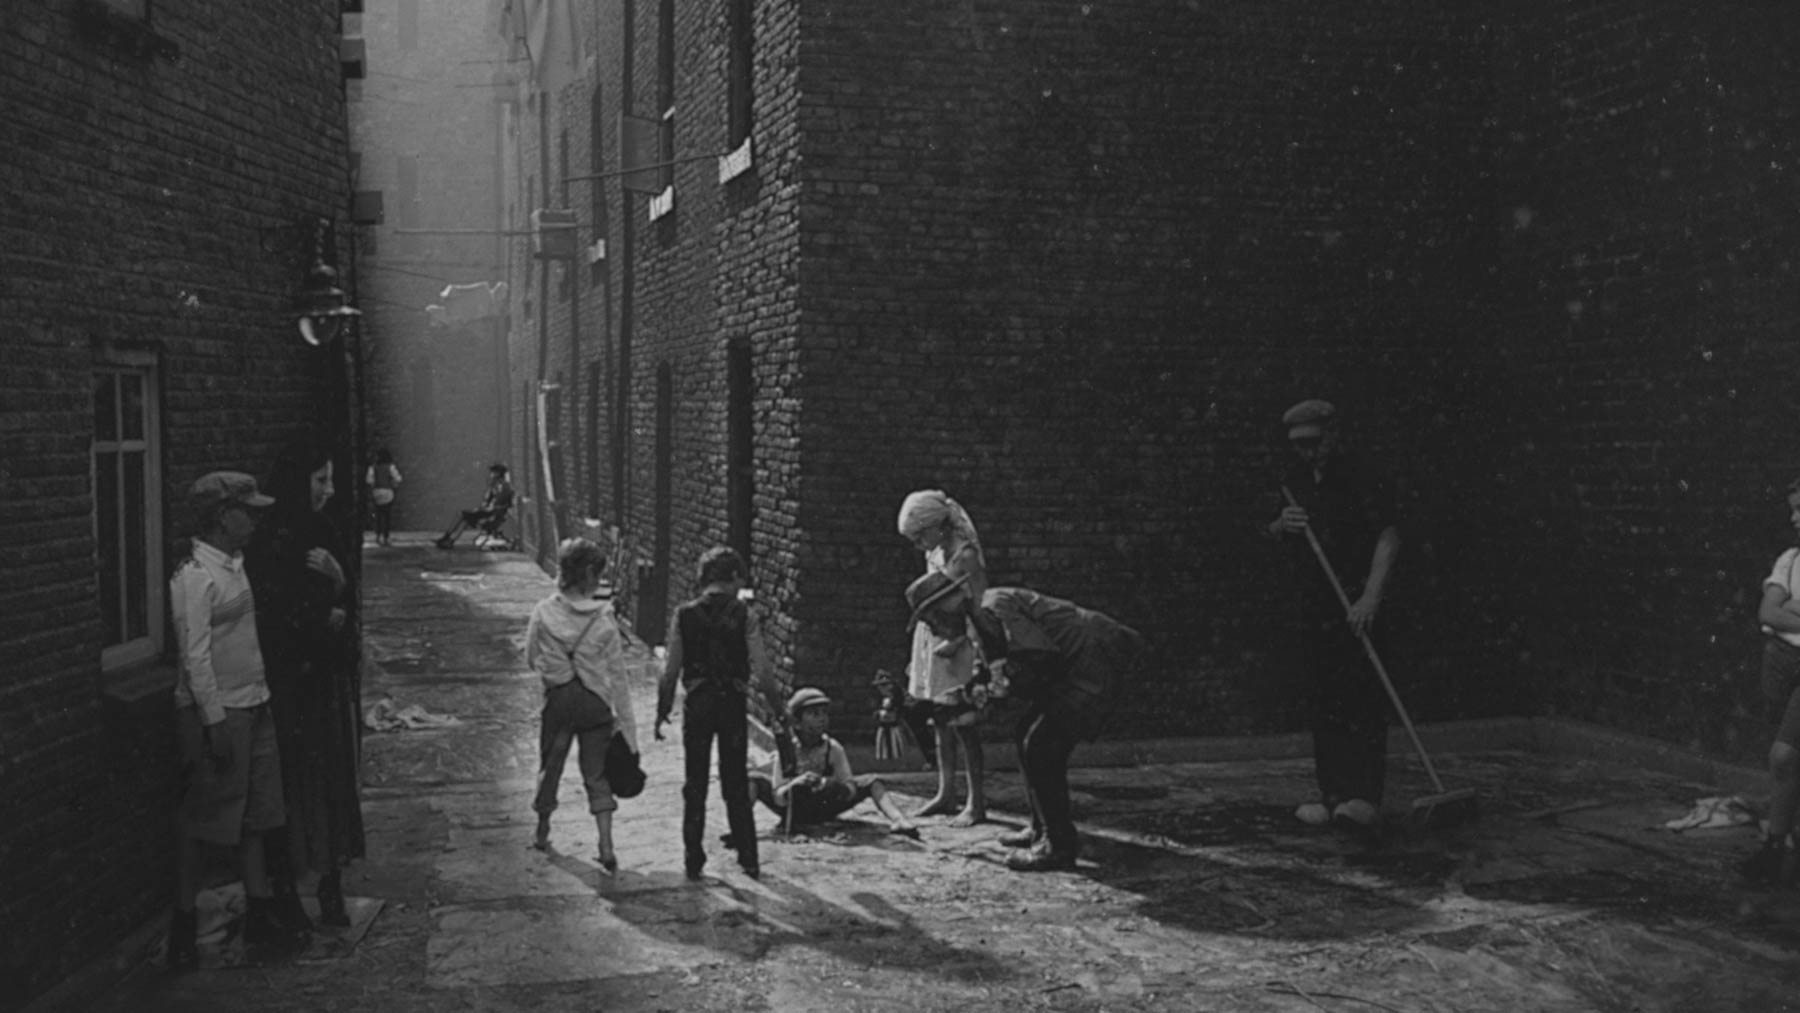 Group of young children in an alleyway